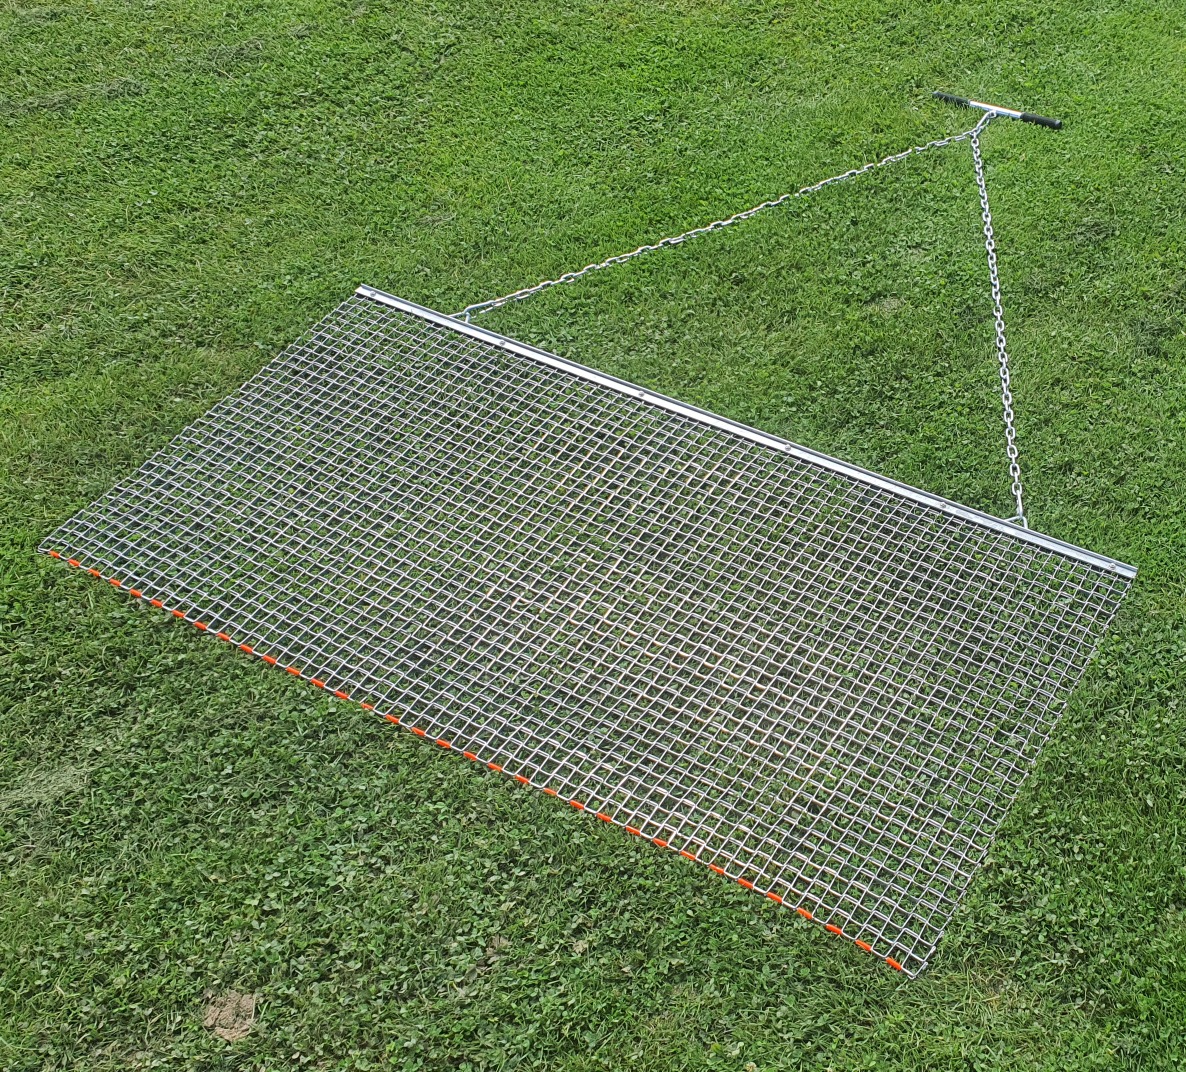 Galvanized Steel Drag Mat for Leveling Grass, Gravel, Clay, and Sand (4' x 6')